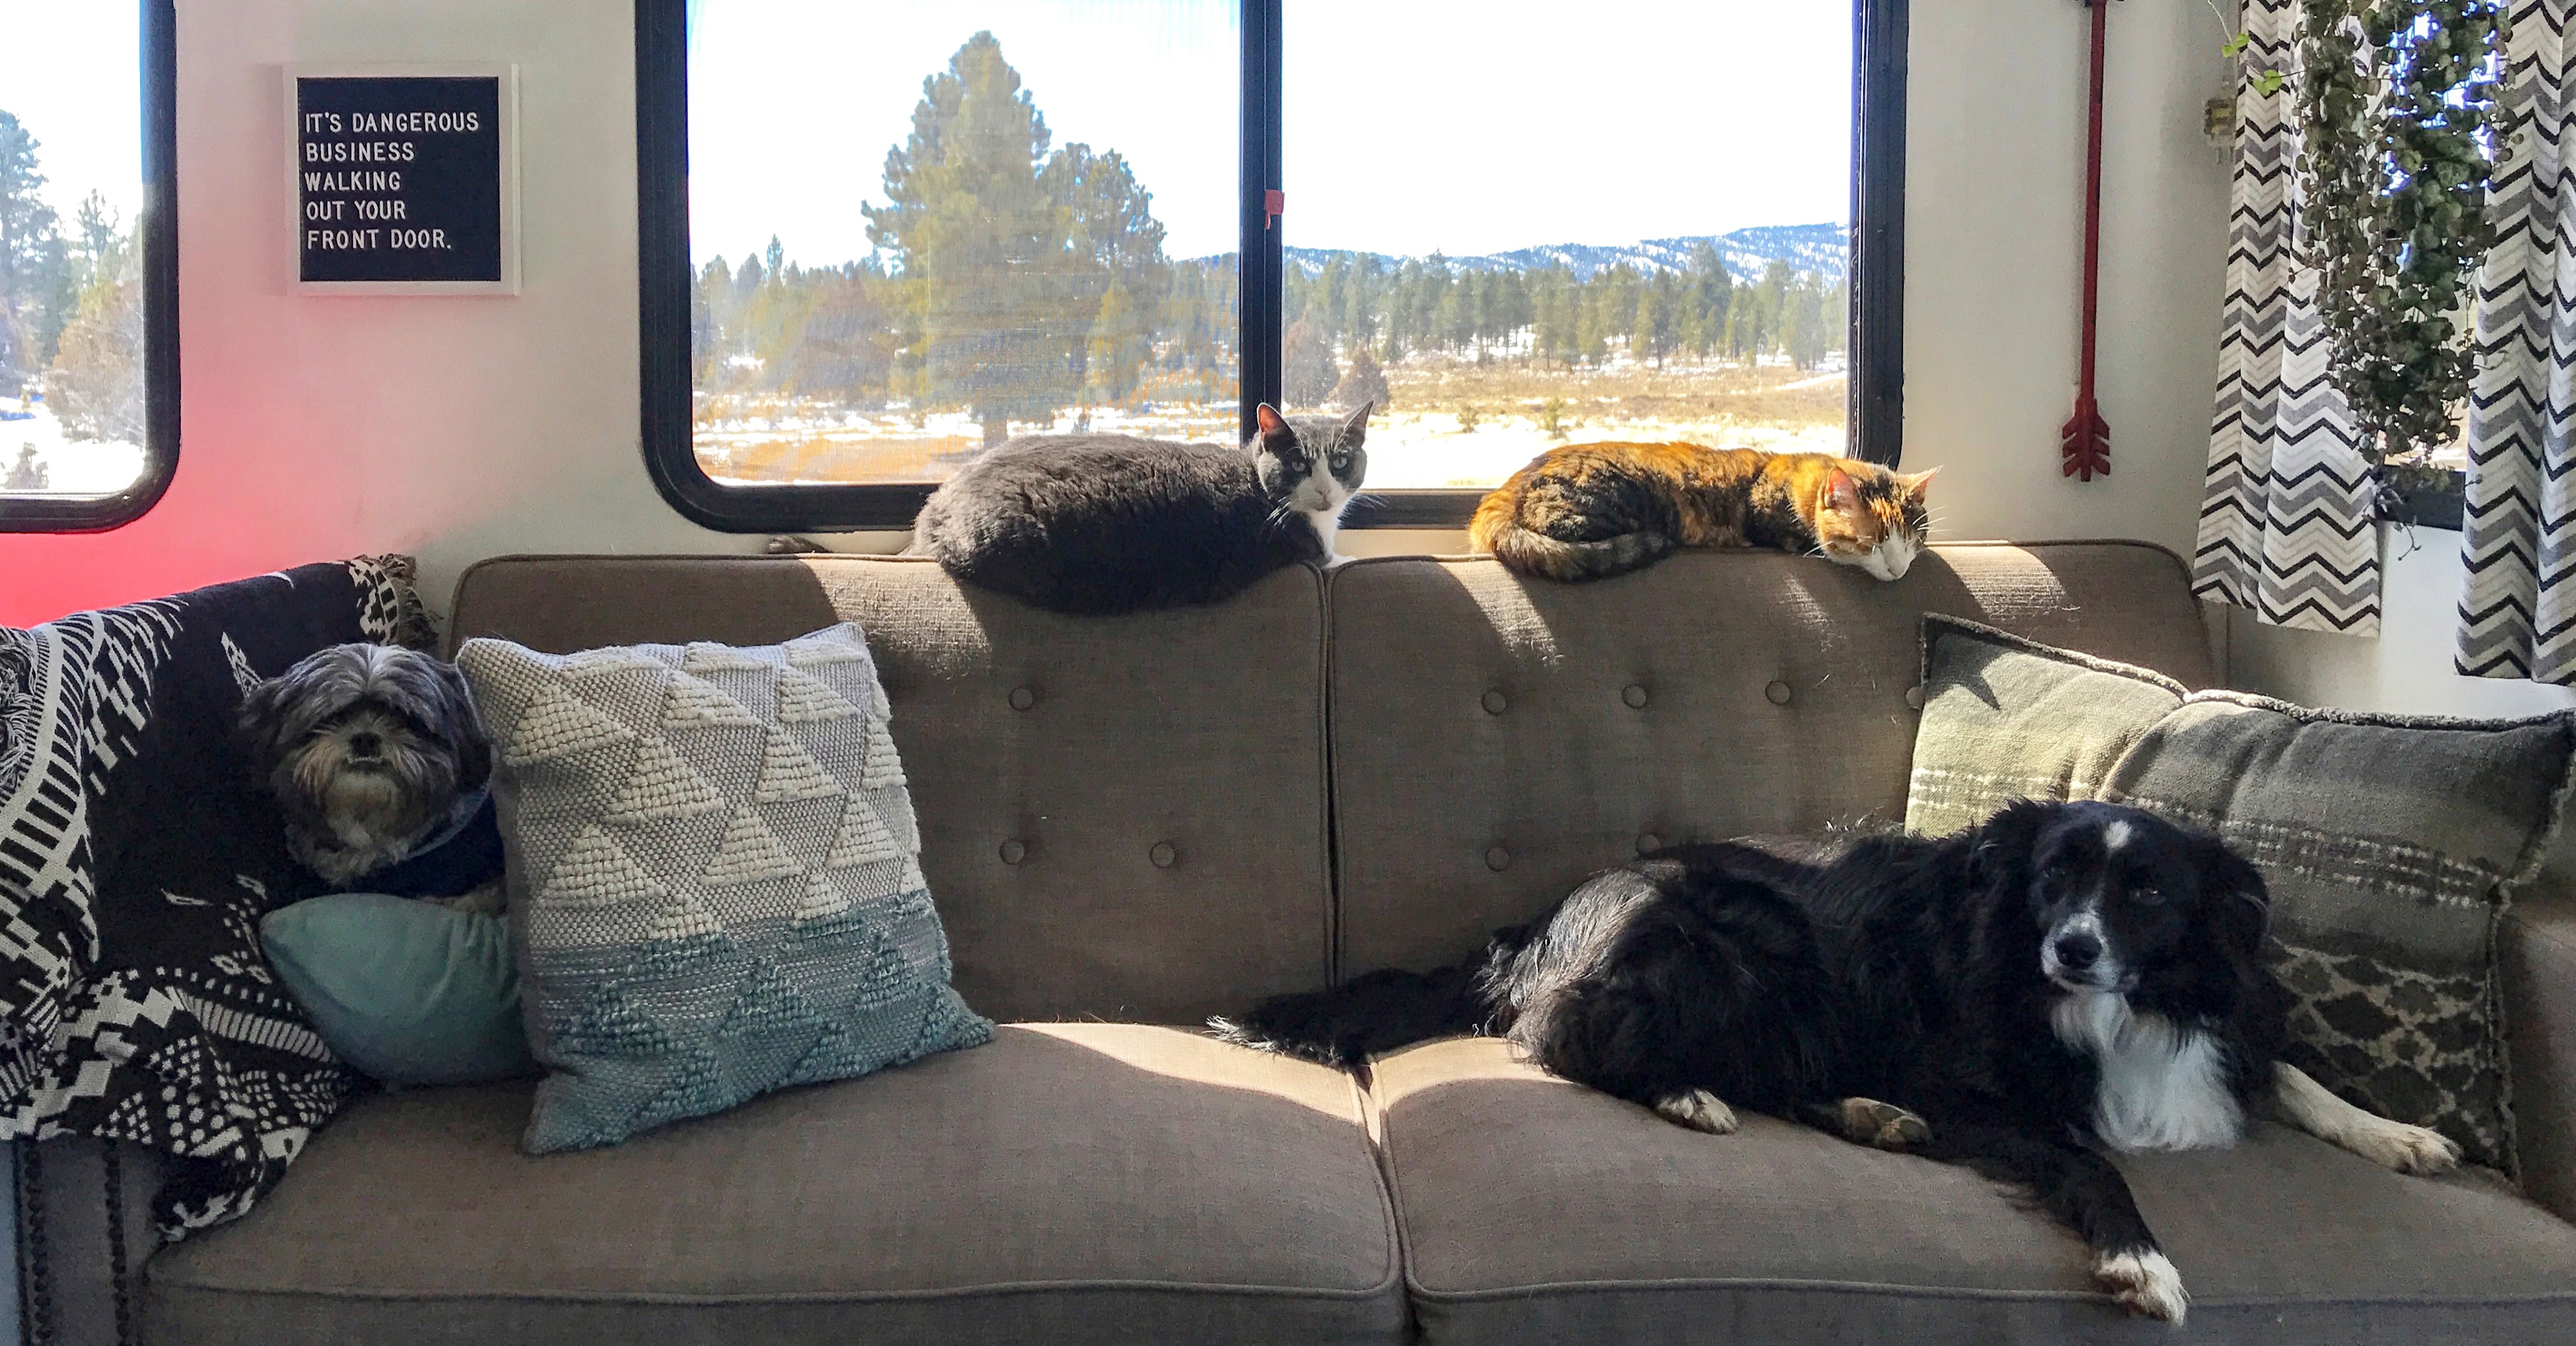 7 Questions to Ask When RVing With Pets